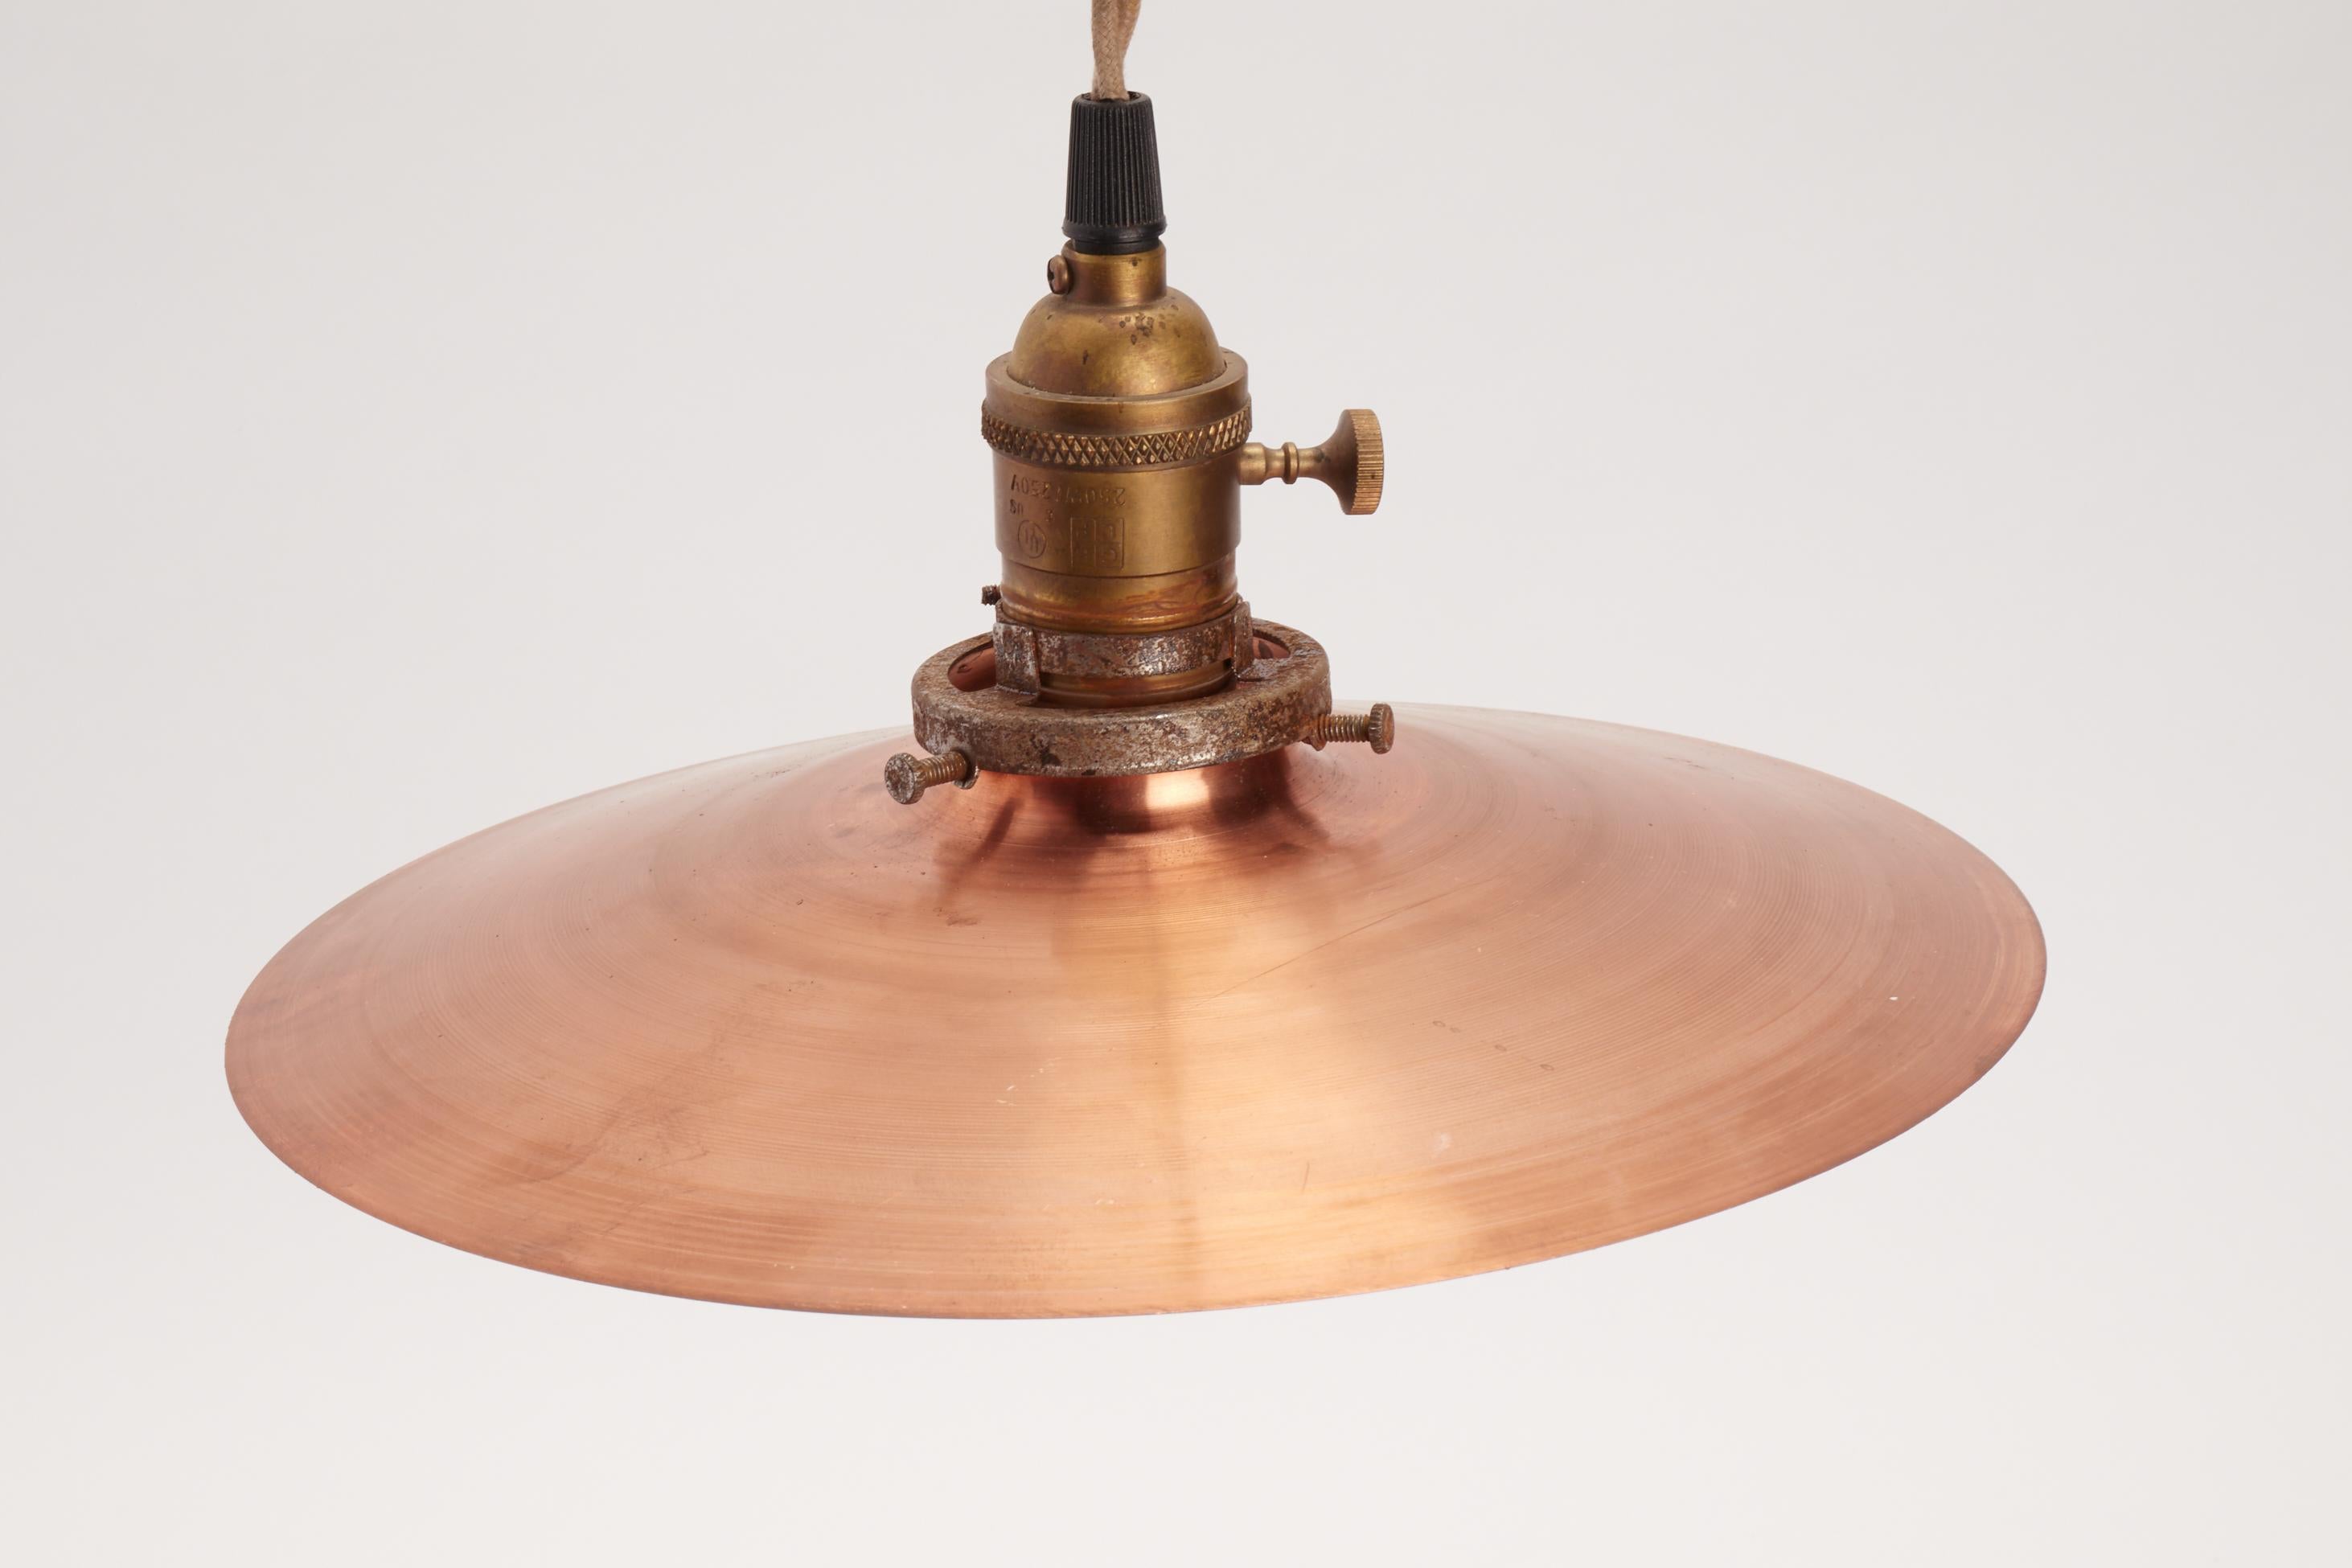 Early 20th Century Germany, 1920s Copper Swinging Lamps